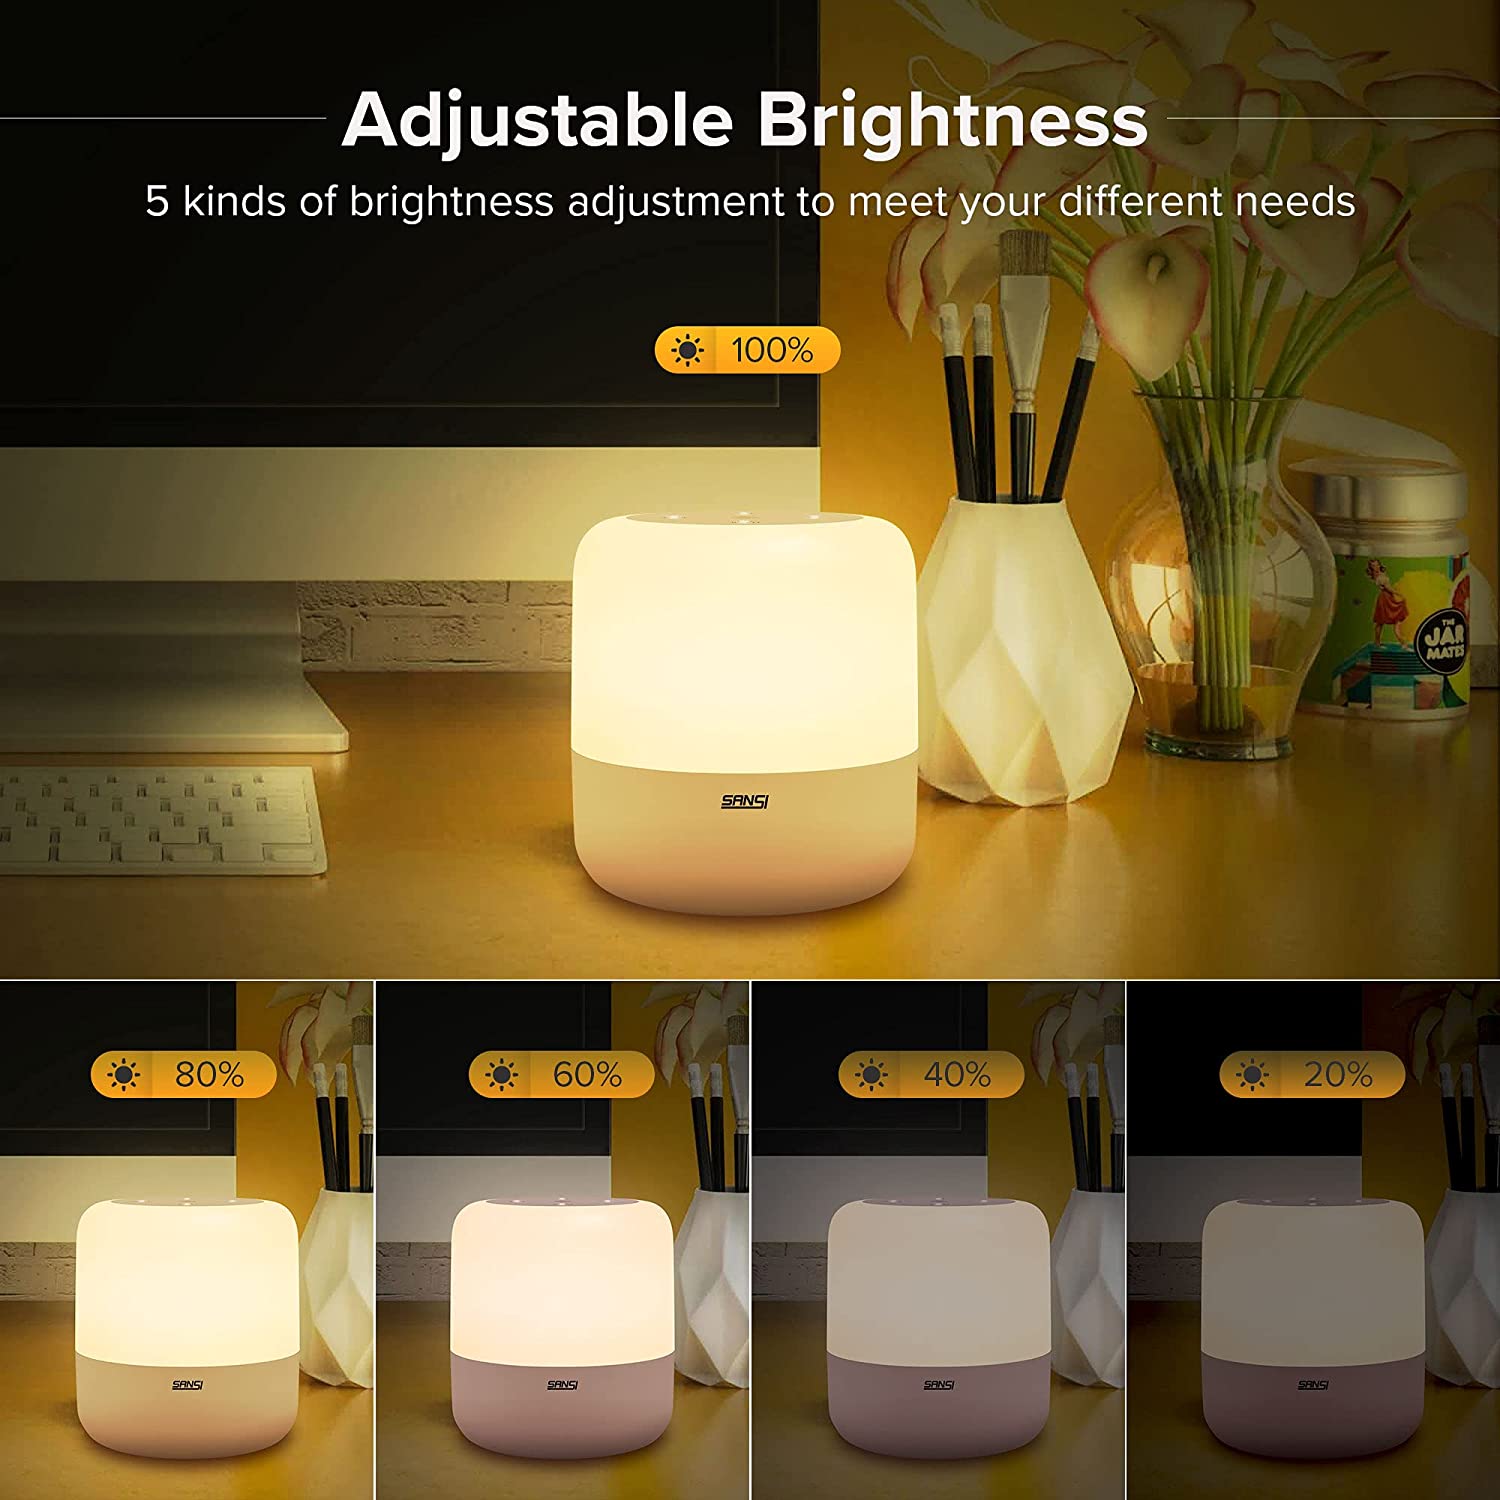 6W LED RGB Touch Sensor Table Lamp (US Only) has adjustable brightness，5 kinds of brightness adjustment to meet your different needs.